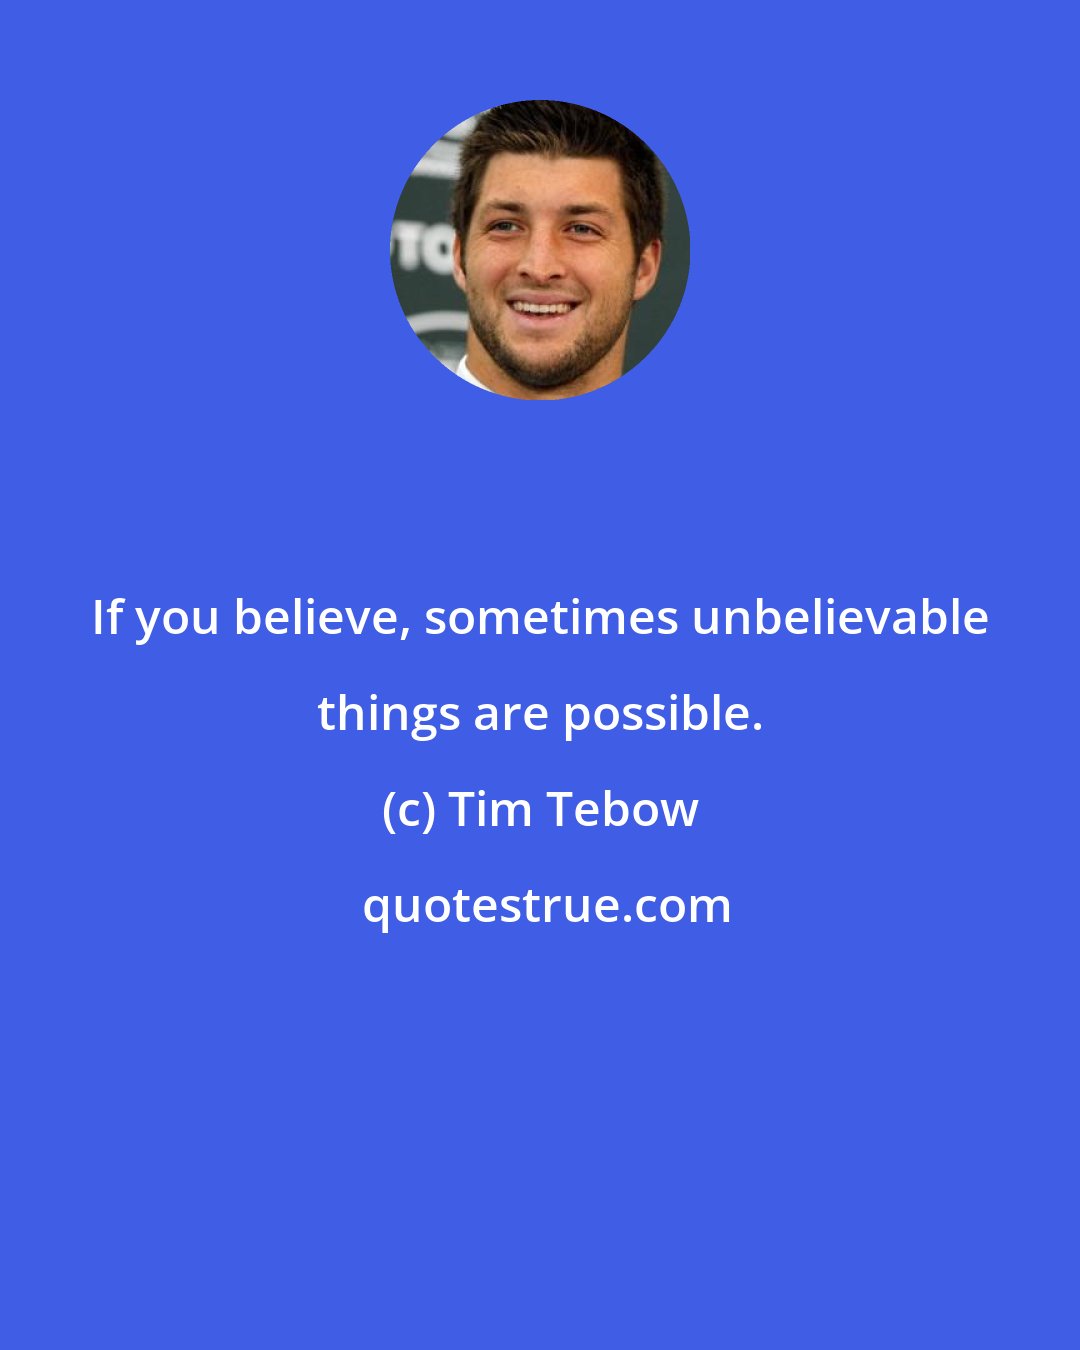 Tim Tebow: If you believe, sometimes unbelievable things are possible.